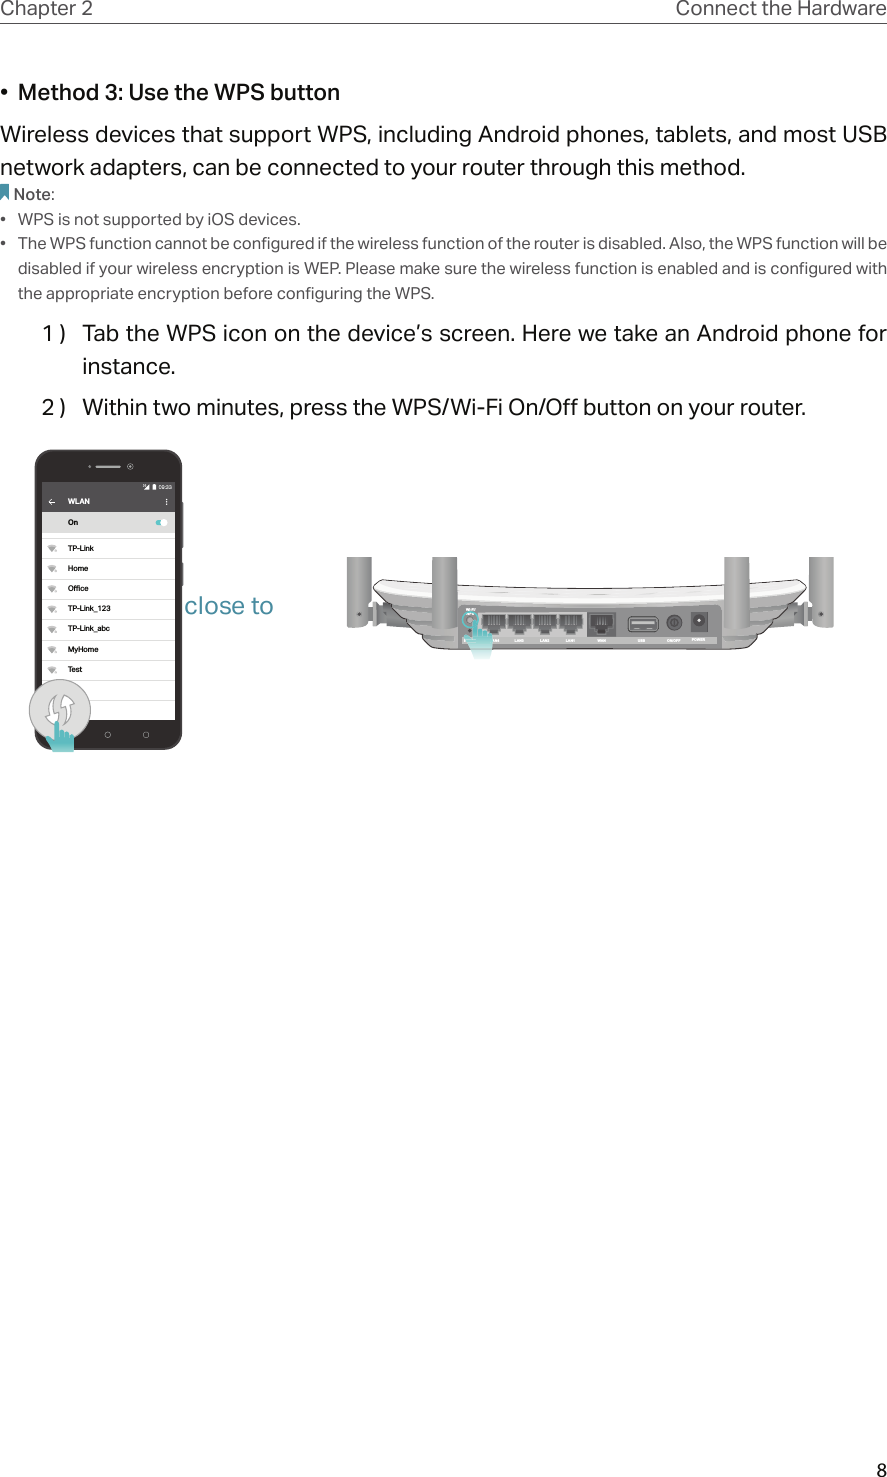 8Chapter 2 Connect the Hardware•  Method 3: Use the WPS buttonWireless devices that support WPS, including Android phones, tablets, and most USB network adapters, can be connected to your router through this method.Note:•  WPS is not supported by iOS devices.•  The WPS function cannot be configured if the wireless function of the router is disabled. Also, the WPS function will be disabled if your wireless encryption is WEP. Please make sure the wireless function is enabled and is configured with the appropriate encryption before configuring the WPS.1 )  Tab the WPS icon on the device’s screen. Here we take an Android phone for instance.2 )  Within two minutes, press the WPS/Wi-Fi On/Off button on your router. WLANOnTP-LinkHomeOceTP-Link_123TP-Link_abcMyHomeTestPOWERON/OFFUSBWANLAN1LAN2LAN3LAN4RESETWi-Fi/WPSLALARESETRESETclose to